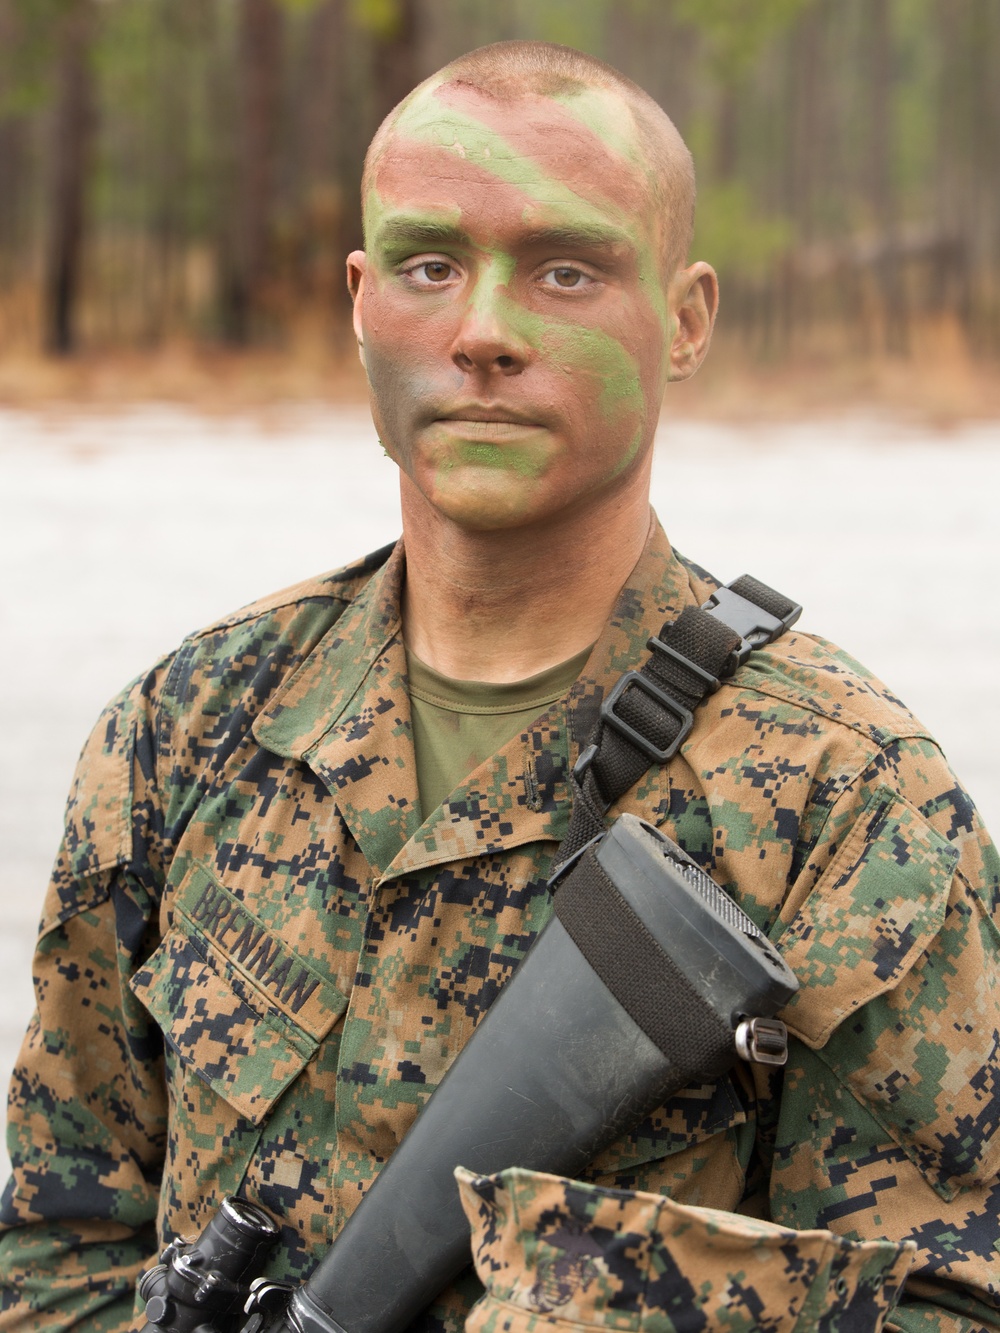 Queensbury, N.Y., native training at Parris Island to become U.S. Marine